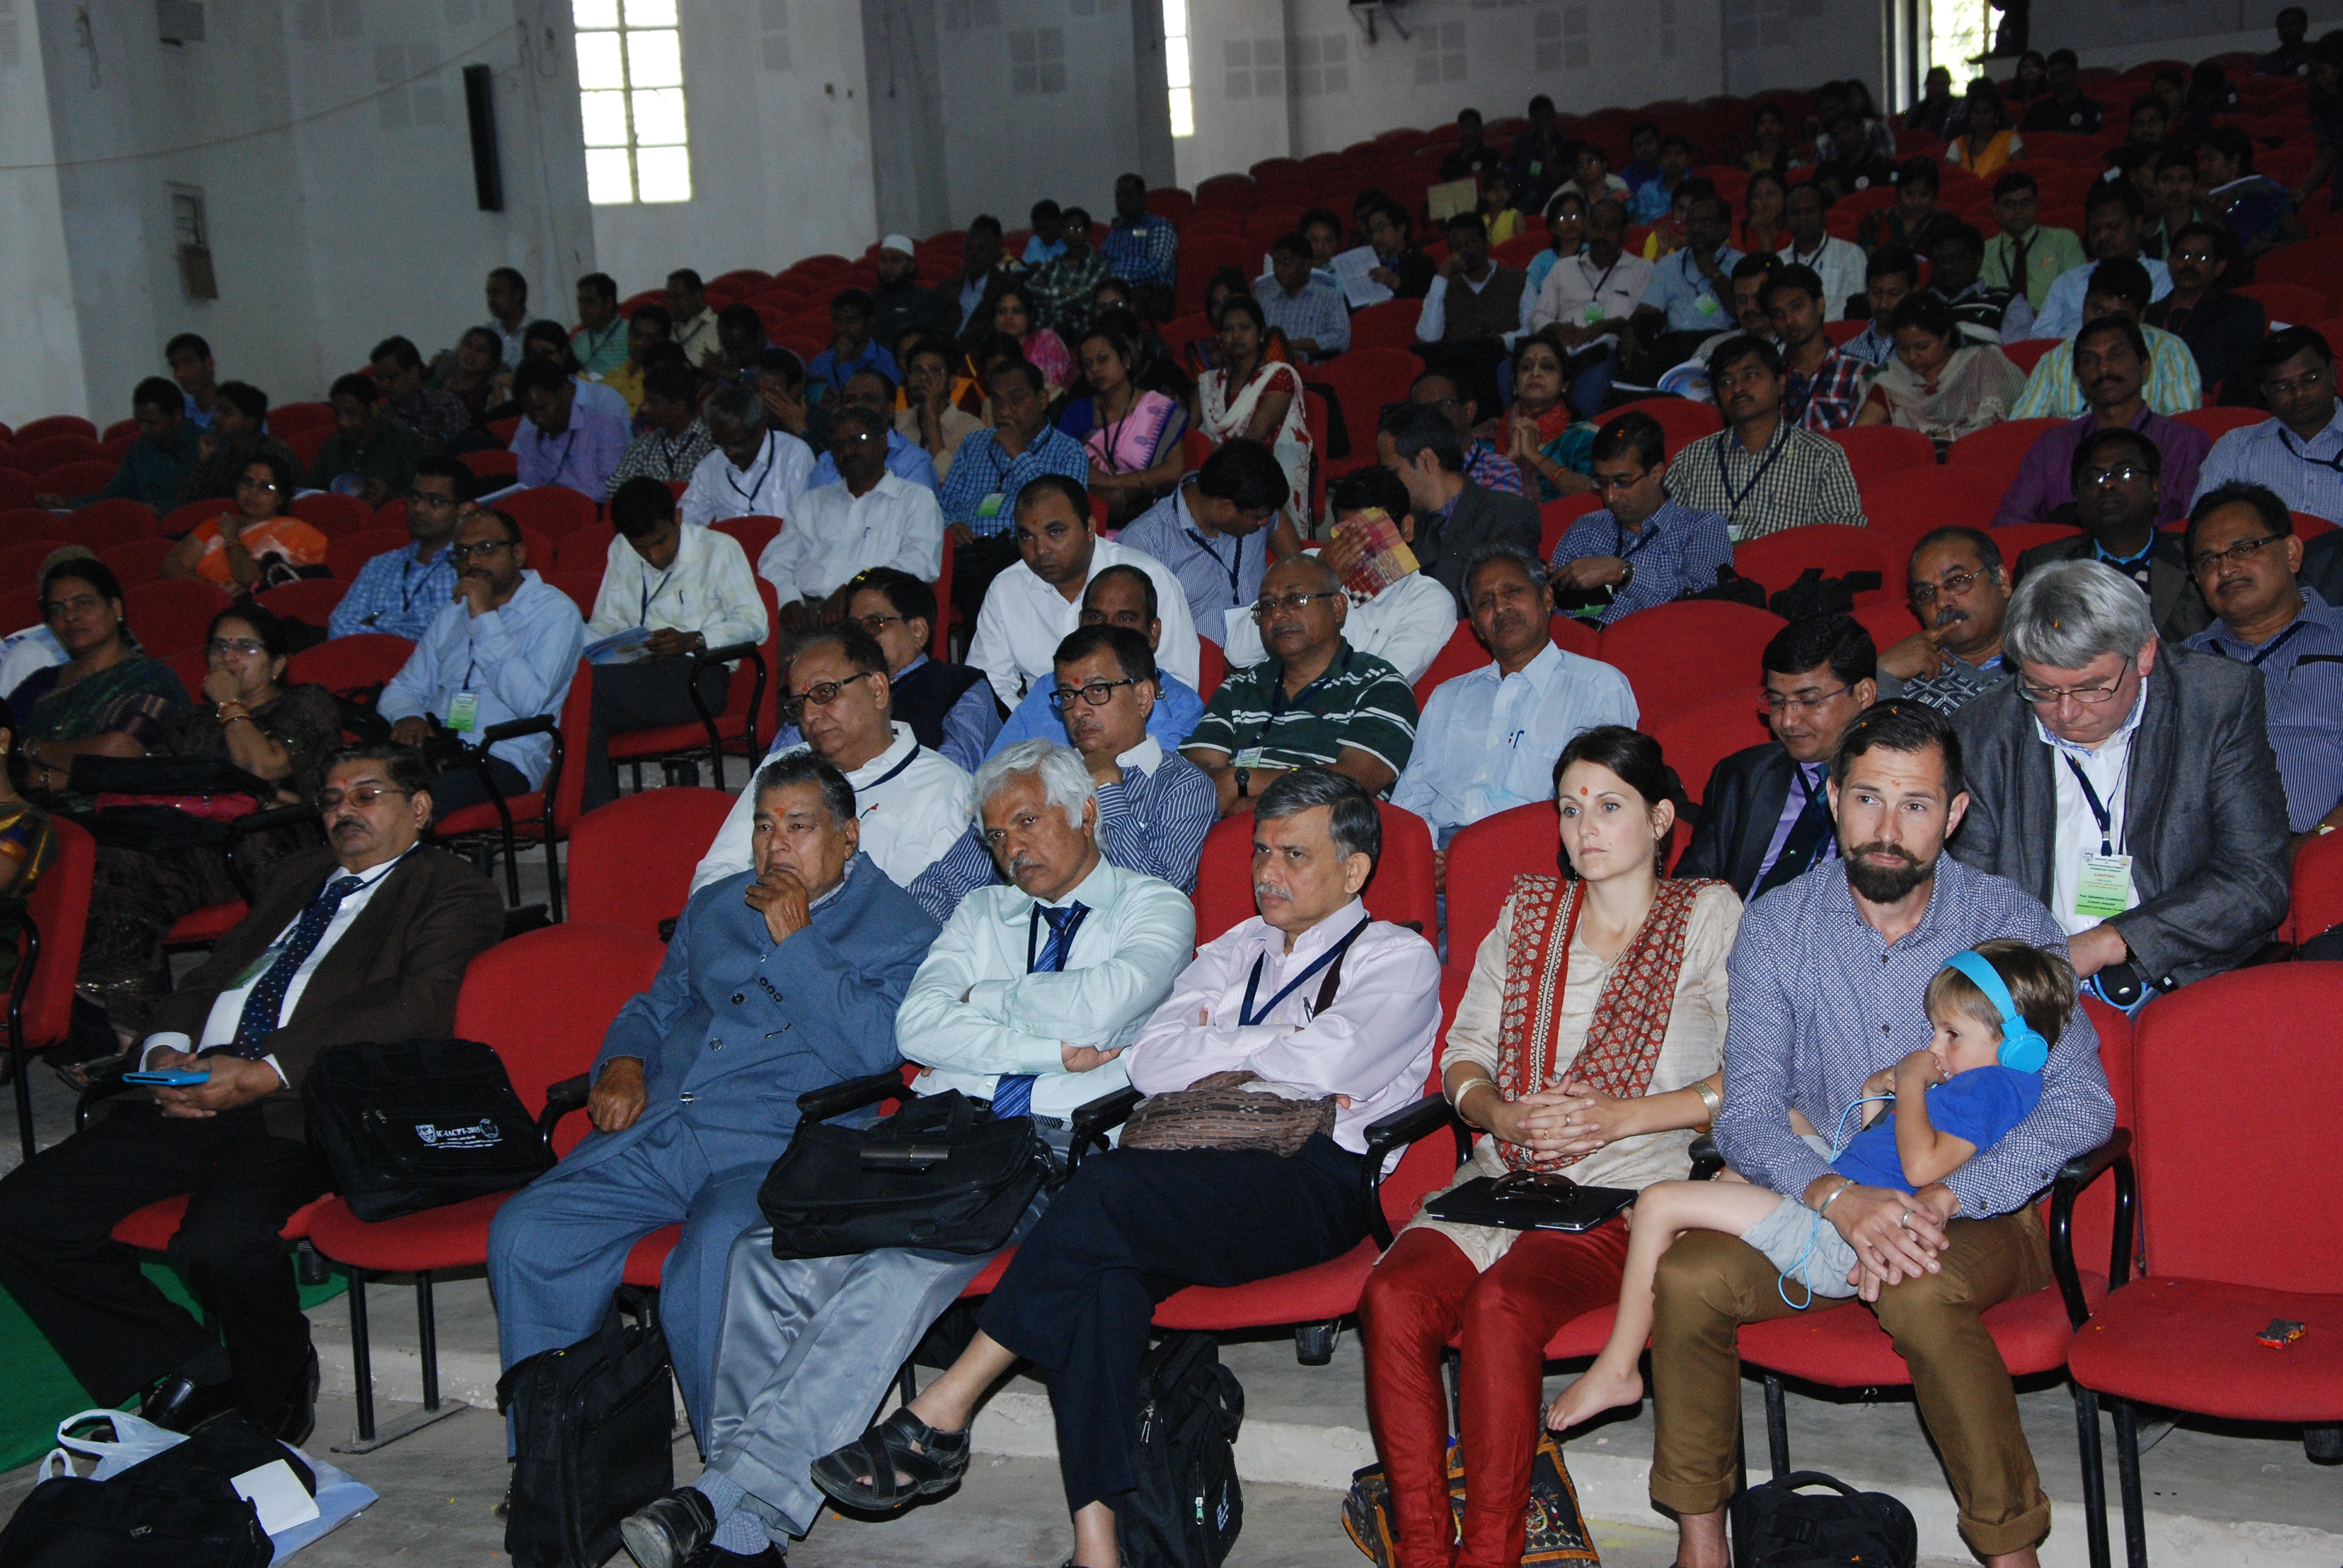 Audience at Conference Hall